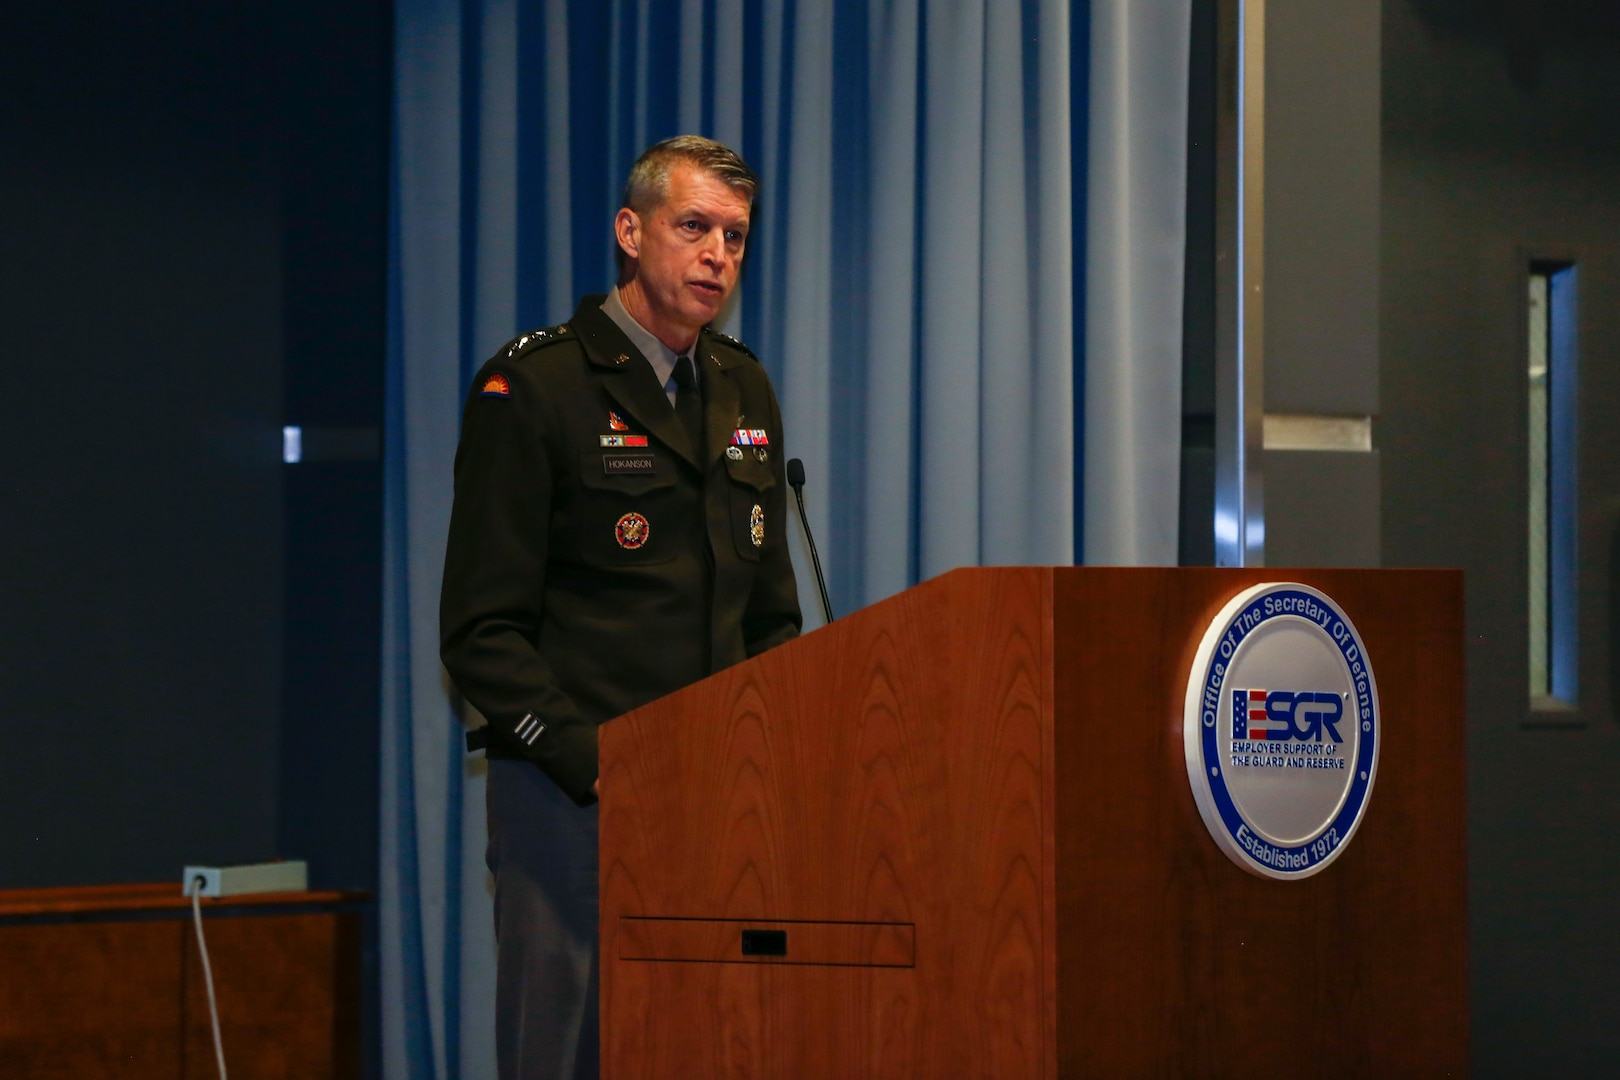 Army Gen. Daniel Hokanson, chief, National Guard Bureau, speaks to Employer Support of the Guard and Reserve state chair members and volunteers during the ESGR National Leader Meeting at the Mark Center in Alexandria, Virginia, Nov. 18, 2022. ESGR, a Department of Defense program, was established in 1972 to promote cooperation and understanding between reserve component service members and their civilian employers and to assist in the resolution of conflicts arising from an employee's military commitment.